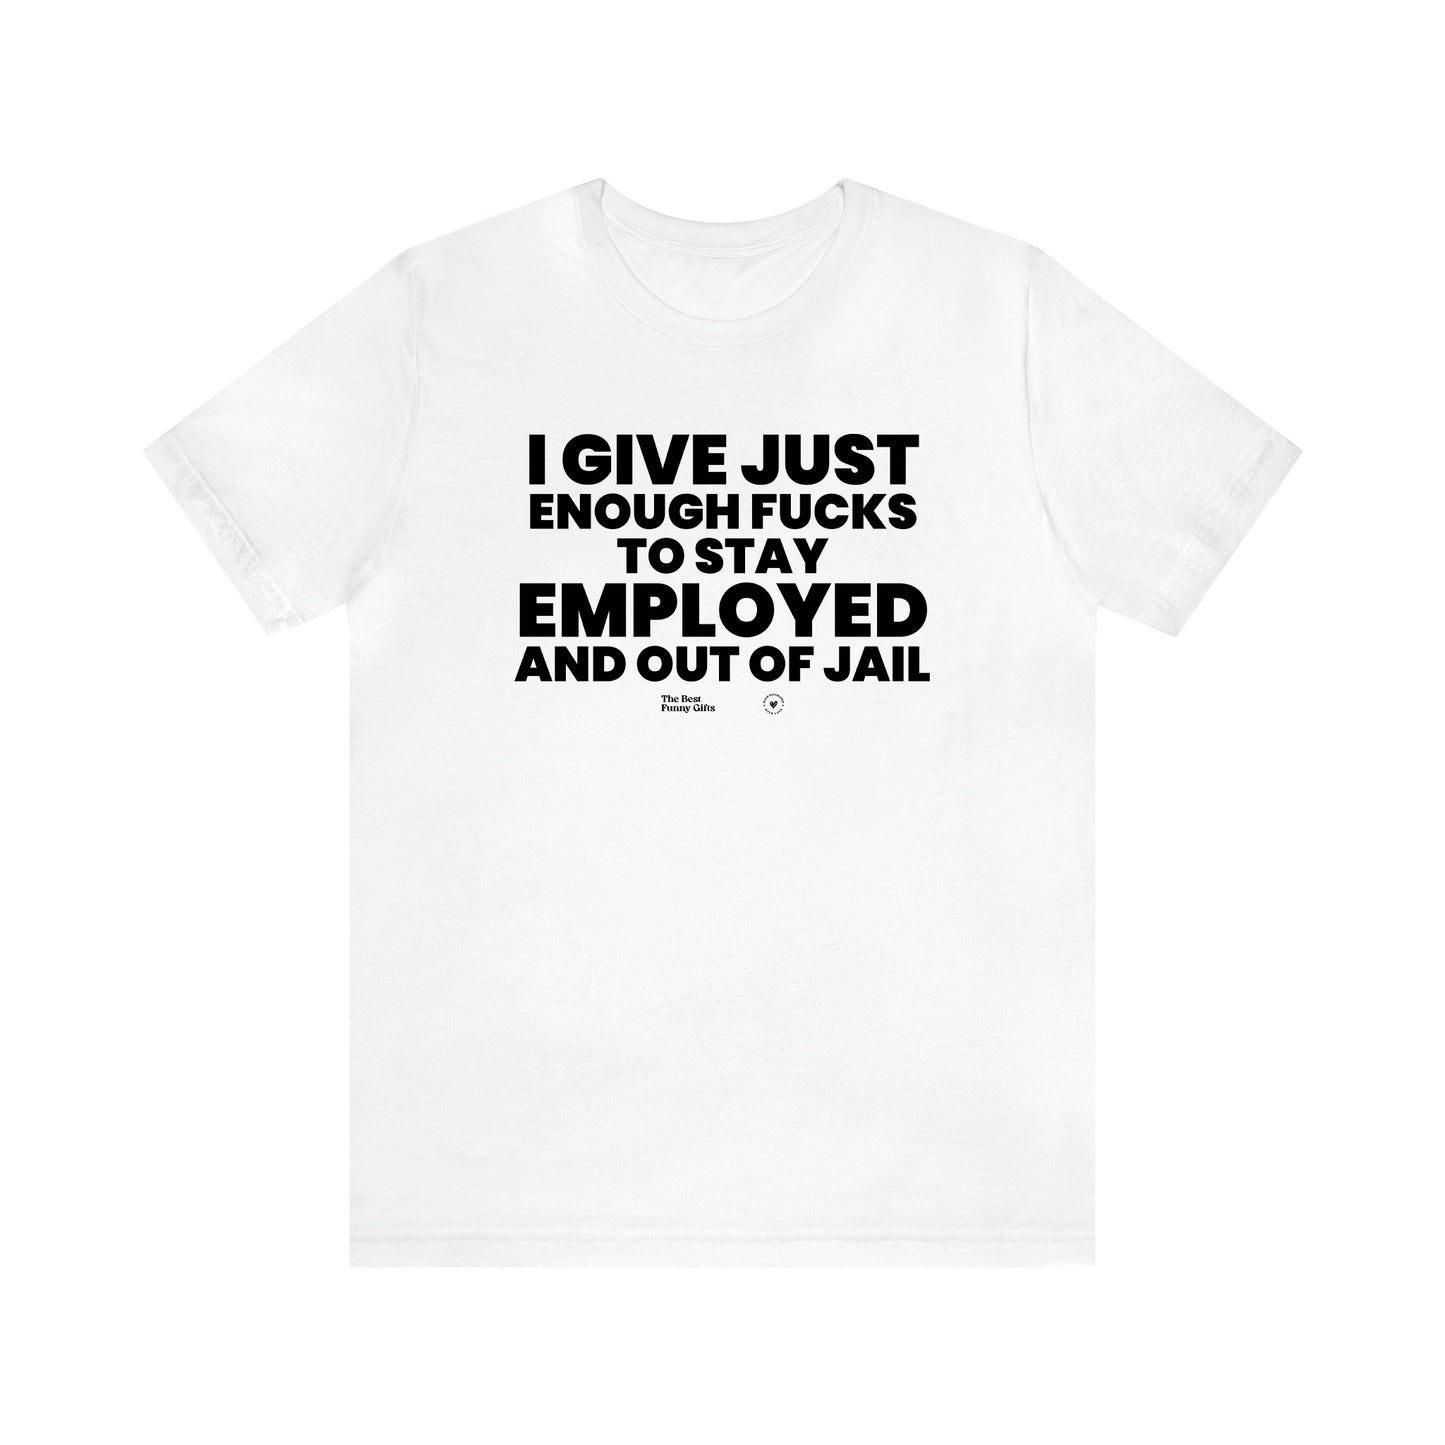 Men's T Shirts I Give Just Enough Fucks to Stay Employed and Out of Jail - The Best Funny Gifts